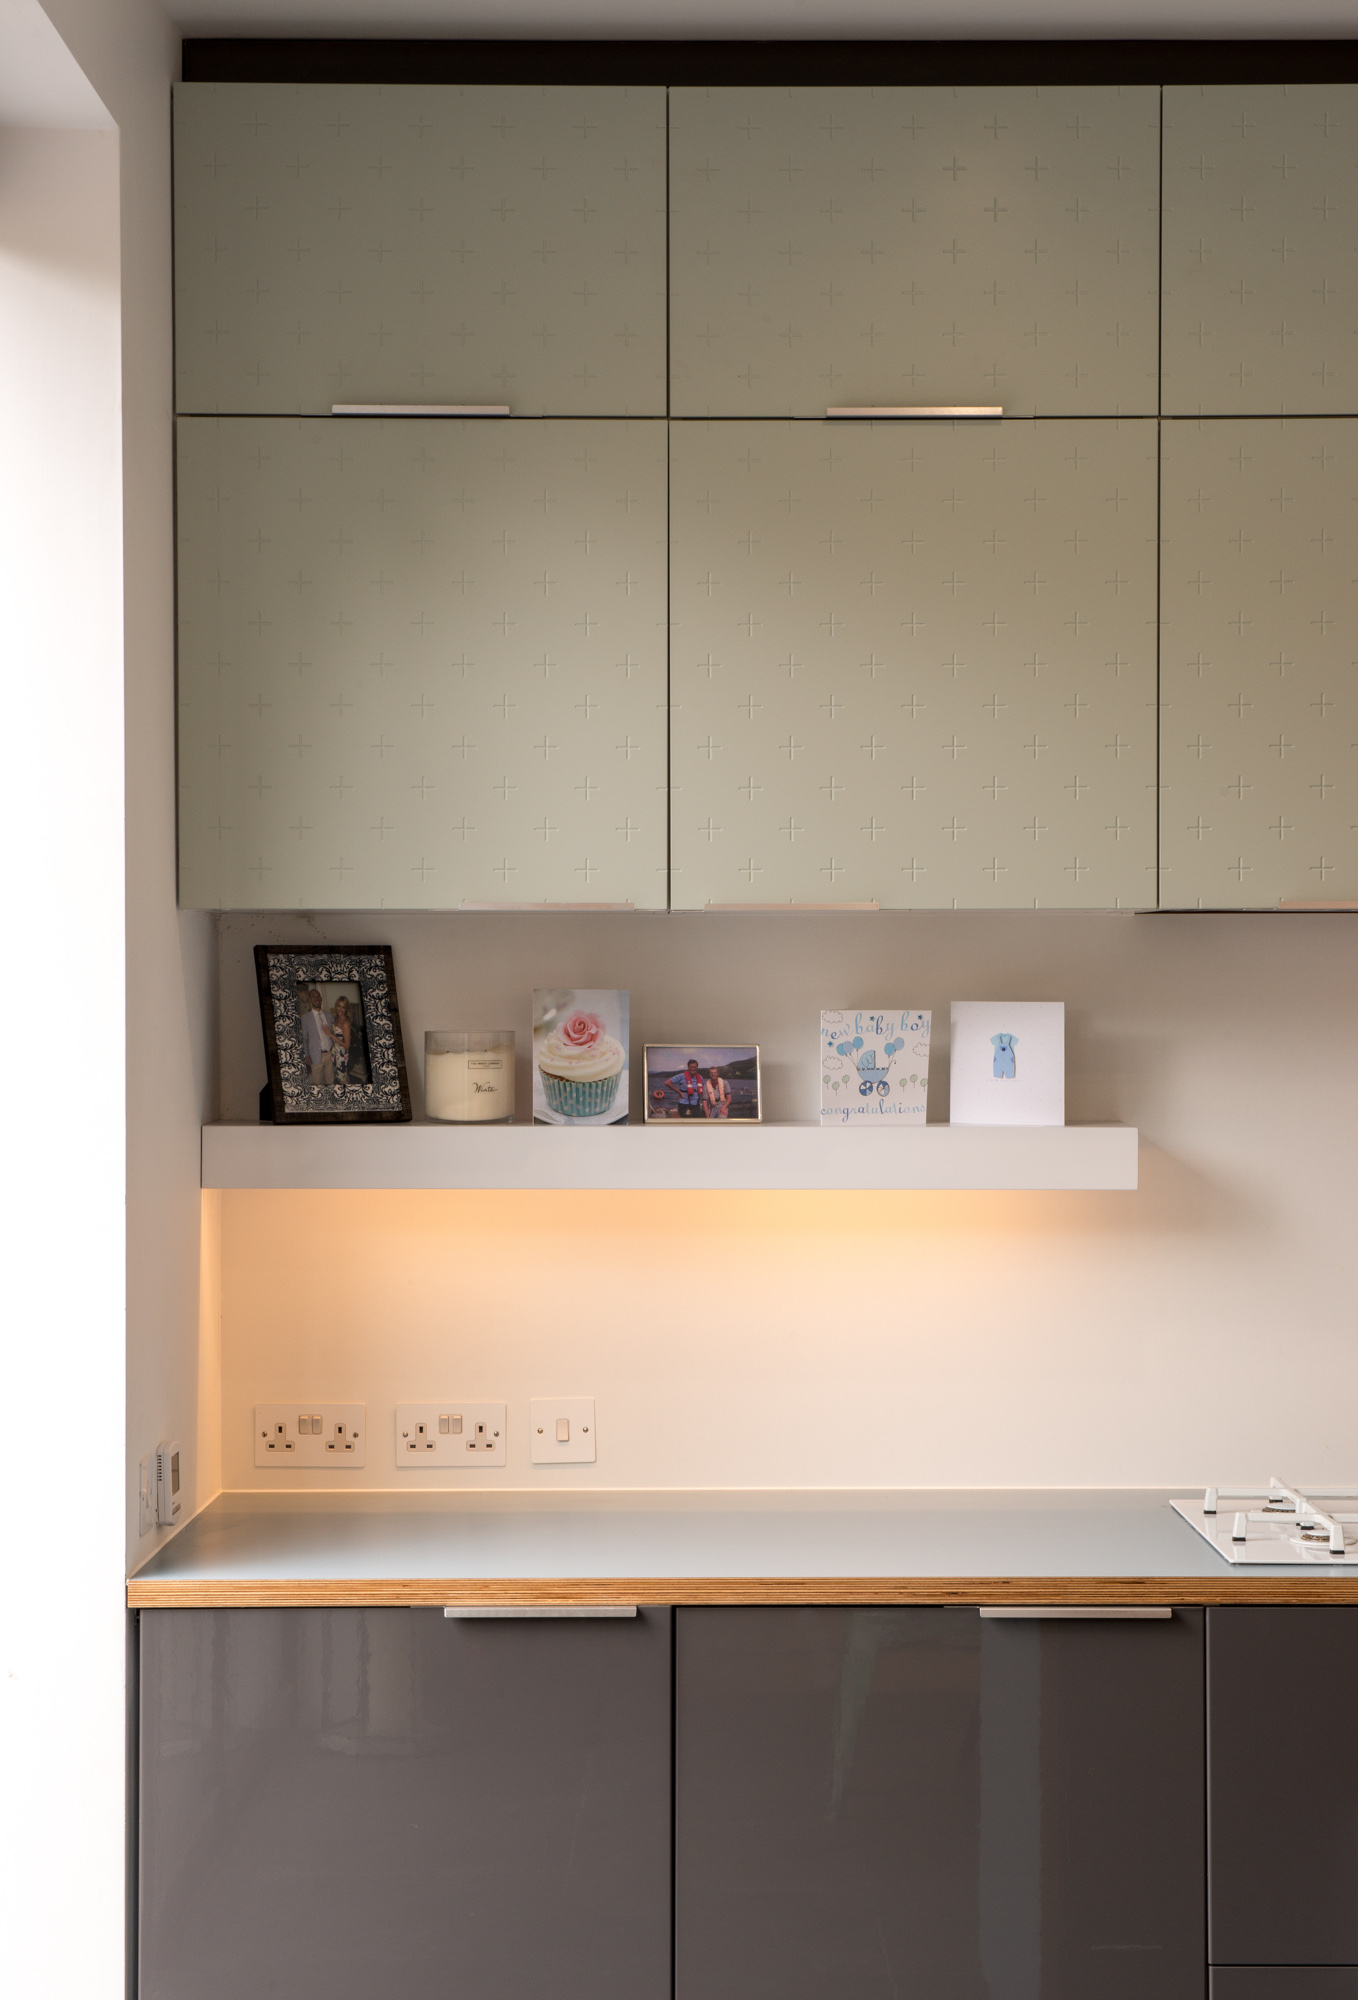  Private House in London, Kitchen extension by Buchanan Partnership Architects.
Photographs by Richard Stonehouse. 